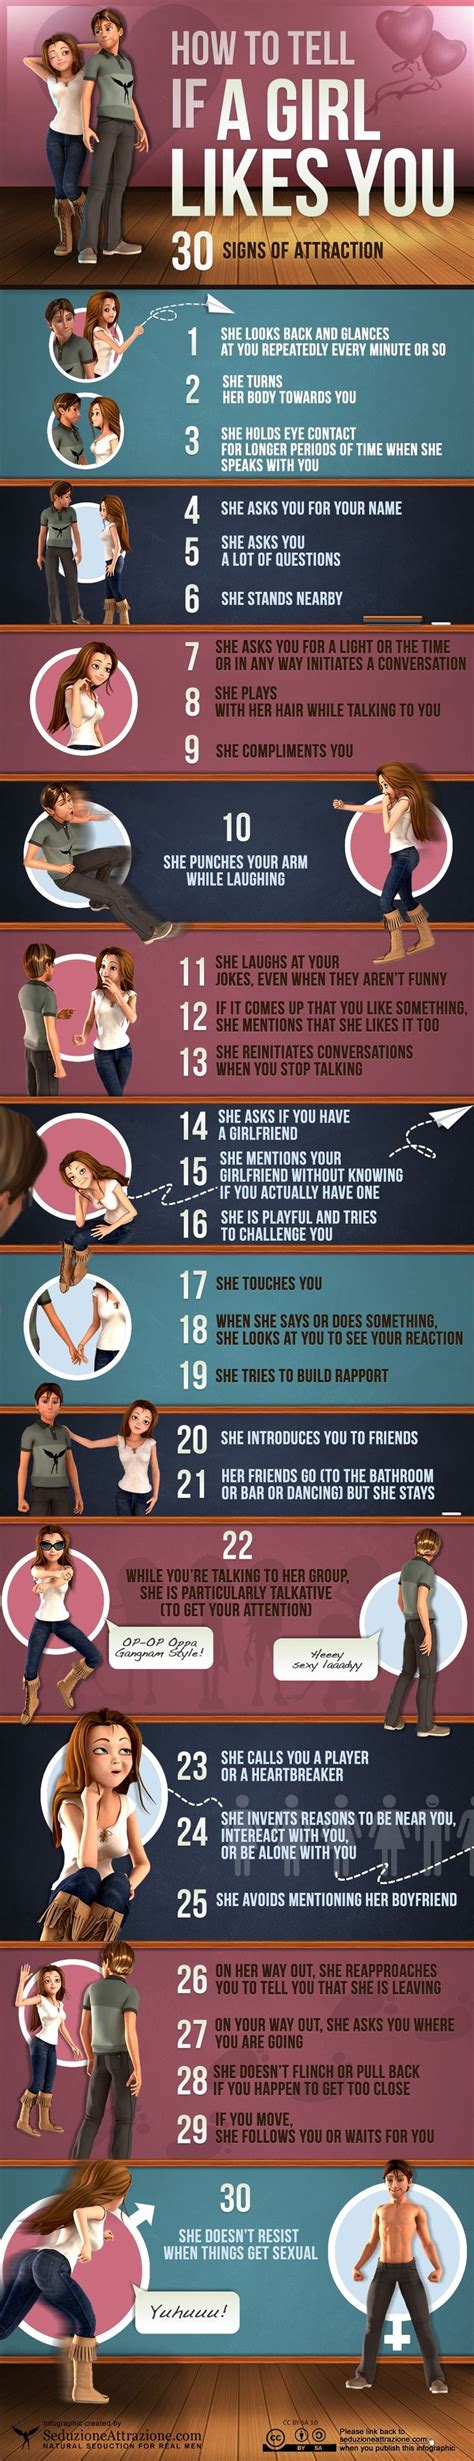 30 signs of attraction if a girl likes you [infographic] infographics signs of attraction a